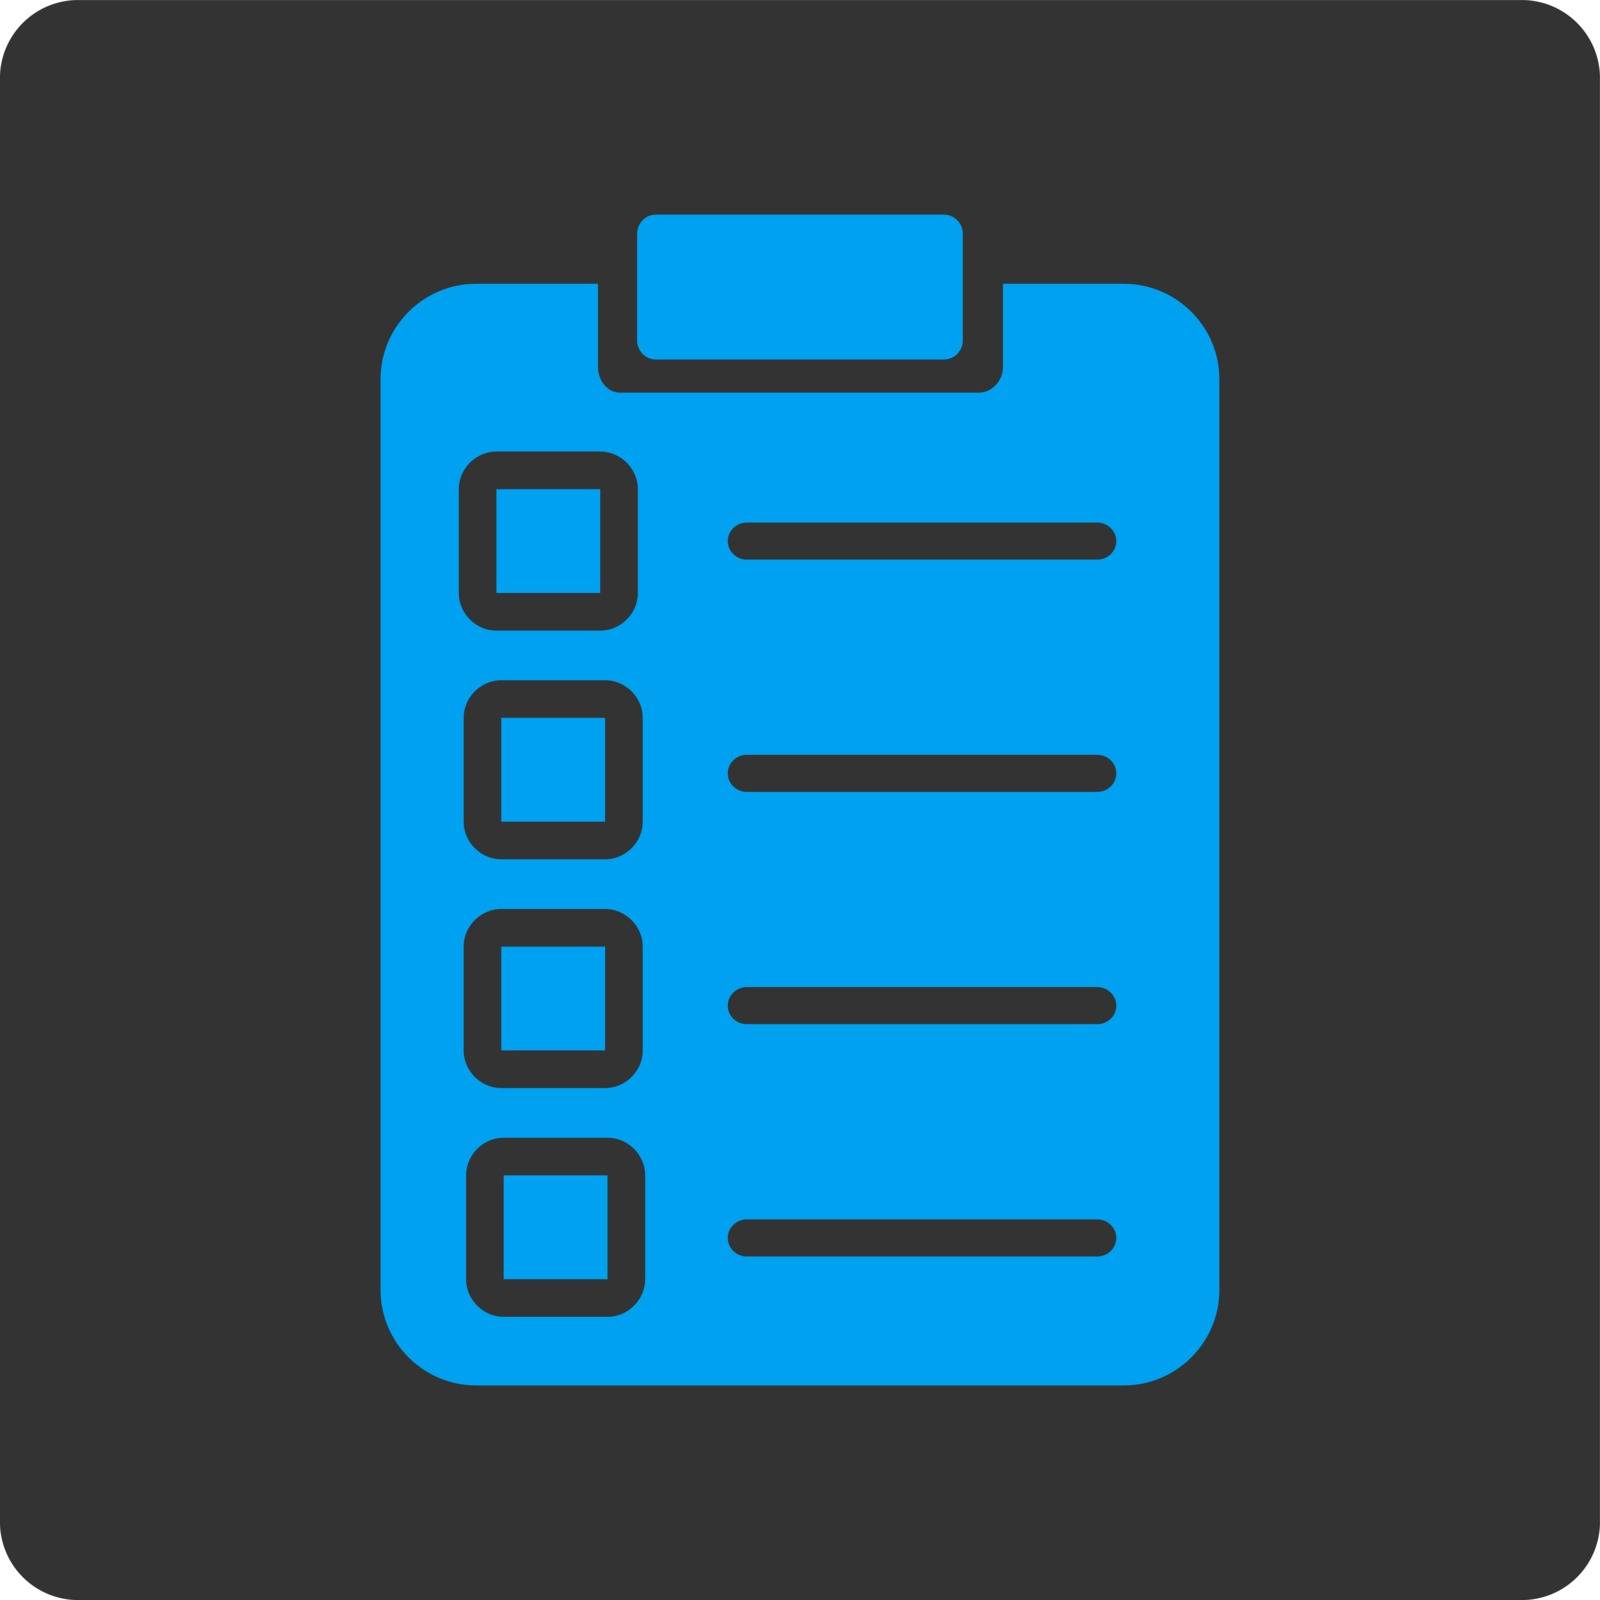 Test task icon. Vector style is blue and gray colors, flat rounded square button on a white background.